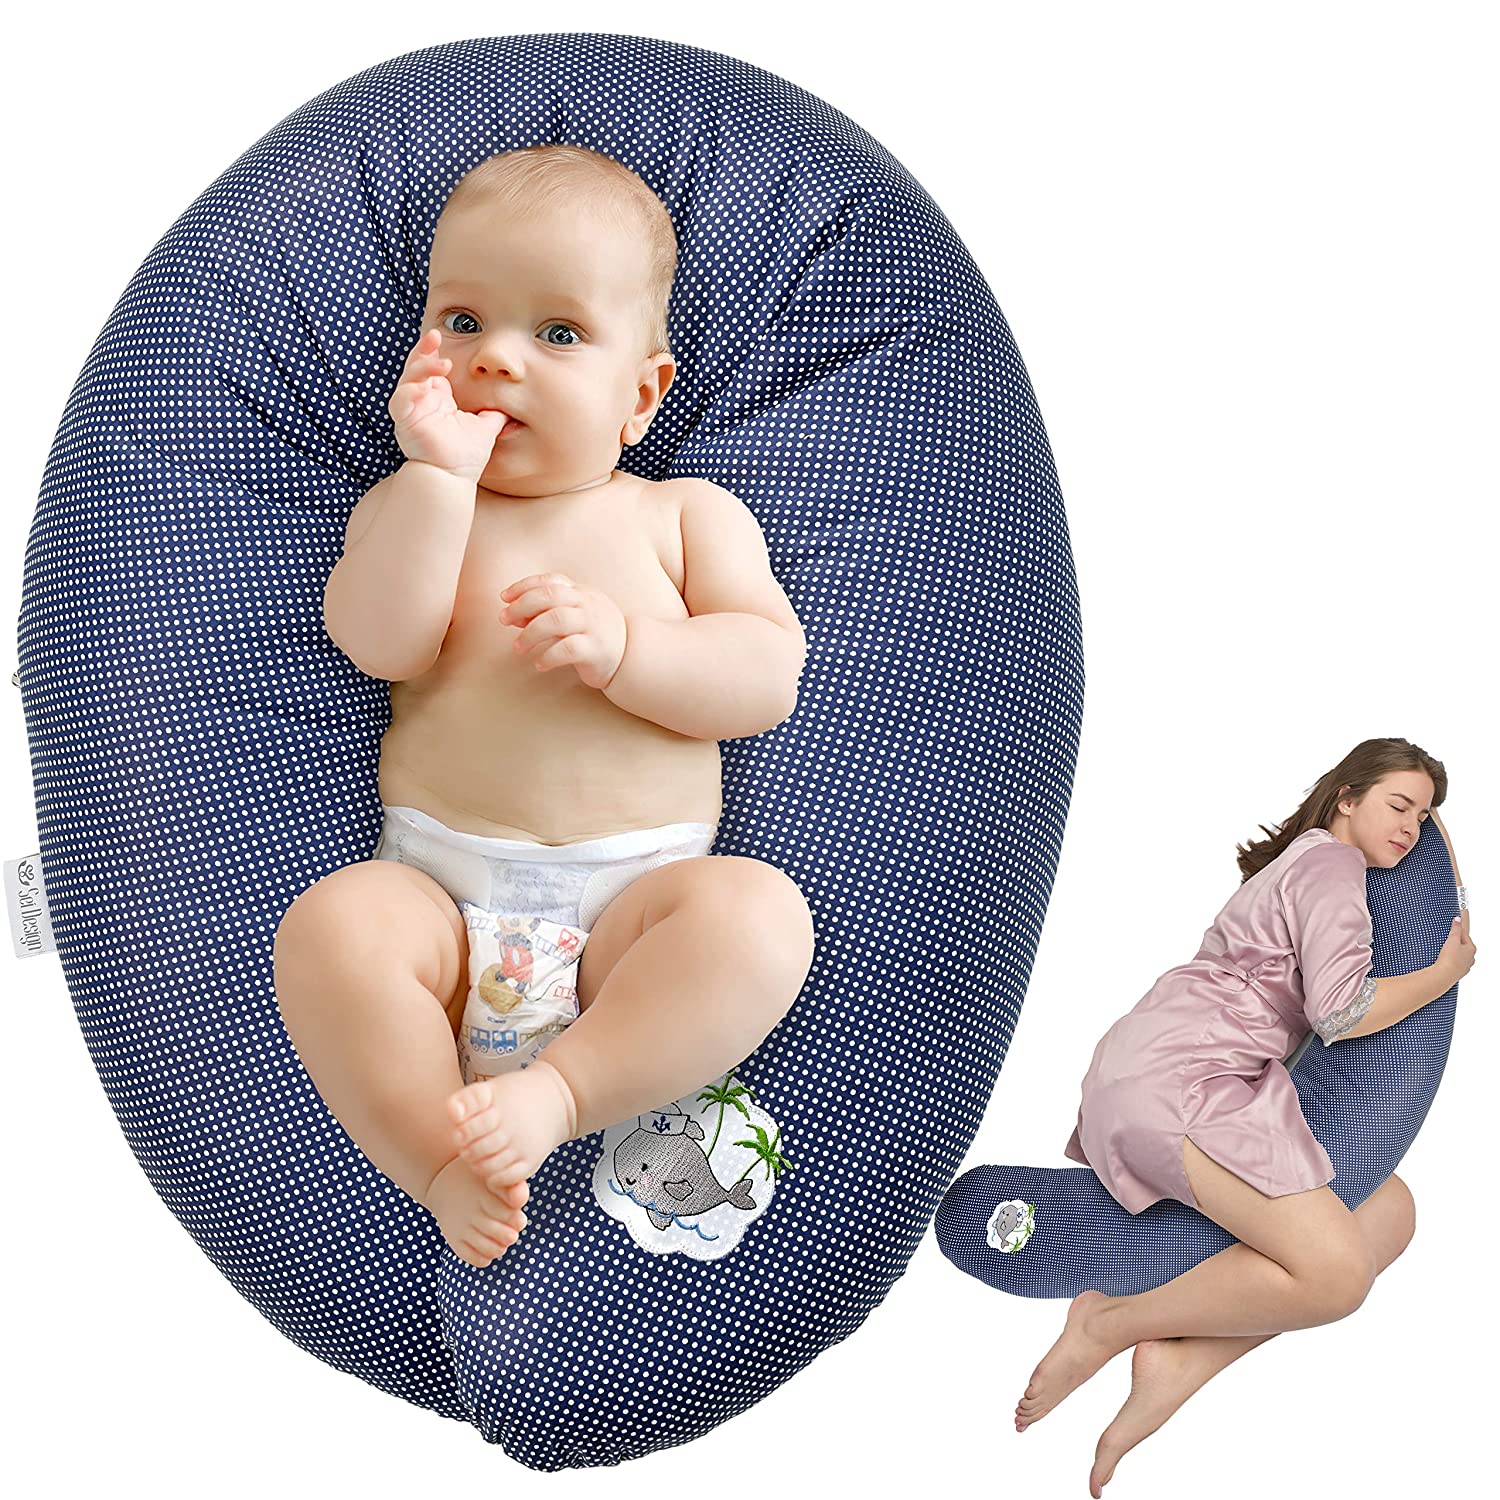 Quality Baby Nursing Cushion Maternity Pillow by Be Design 170 x 30 cm, Filling From 3-D fiber ball – Super Soft and Comfortable. Cover with High-Quality Embroidery.